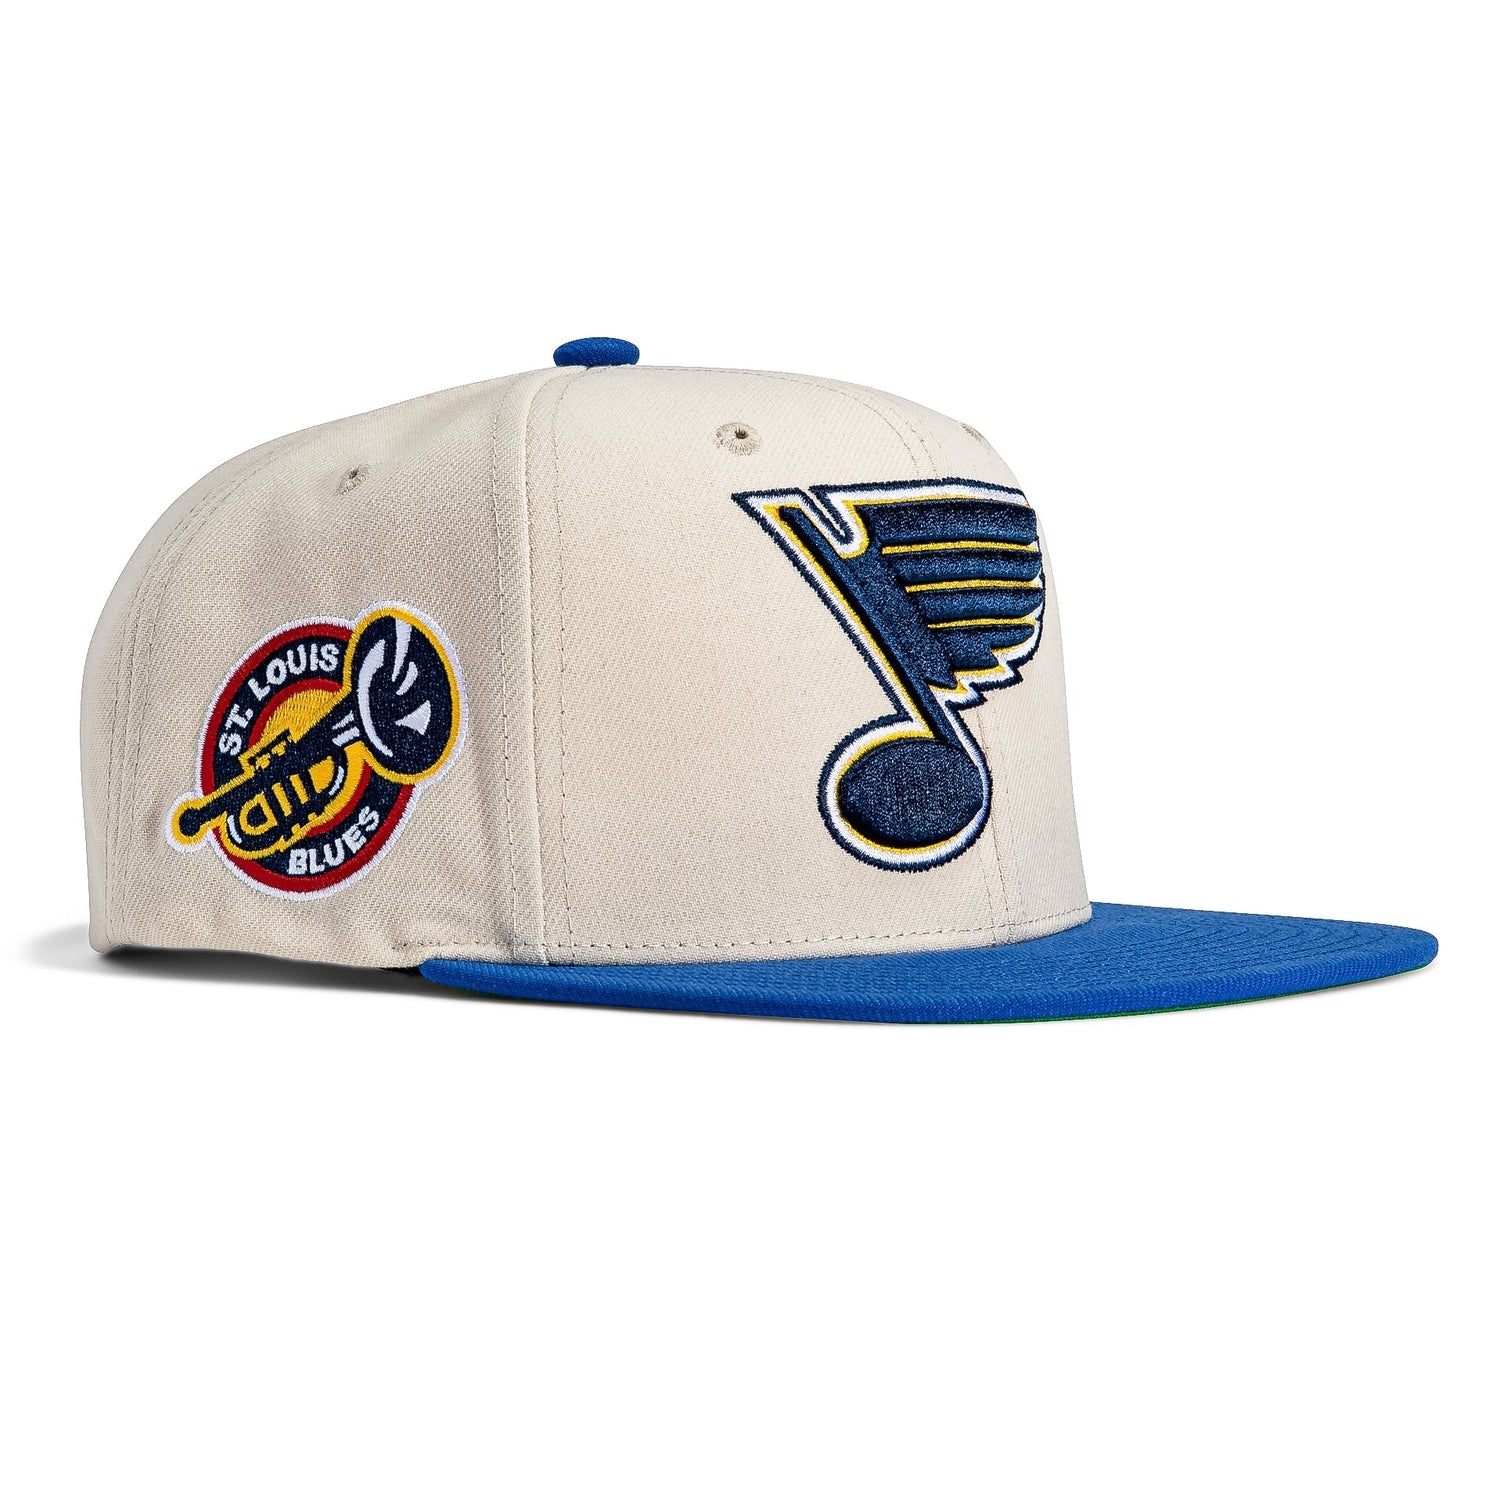 ST LOUIS BLUES HAT CAP YOUTH SNAPBACK BLUE YELLOW NHL ADJUSTABLE OSFM ONE  SIZE